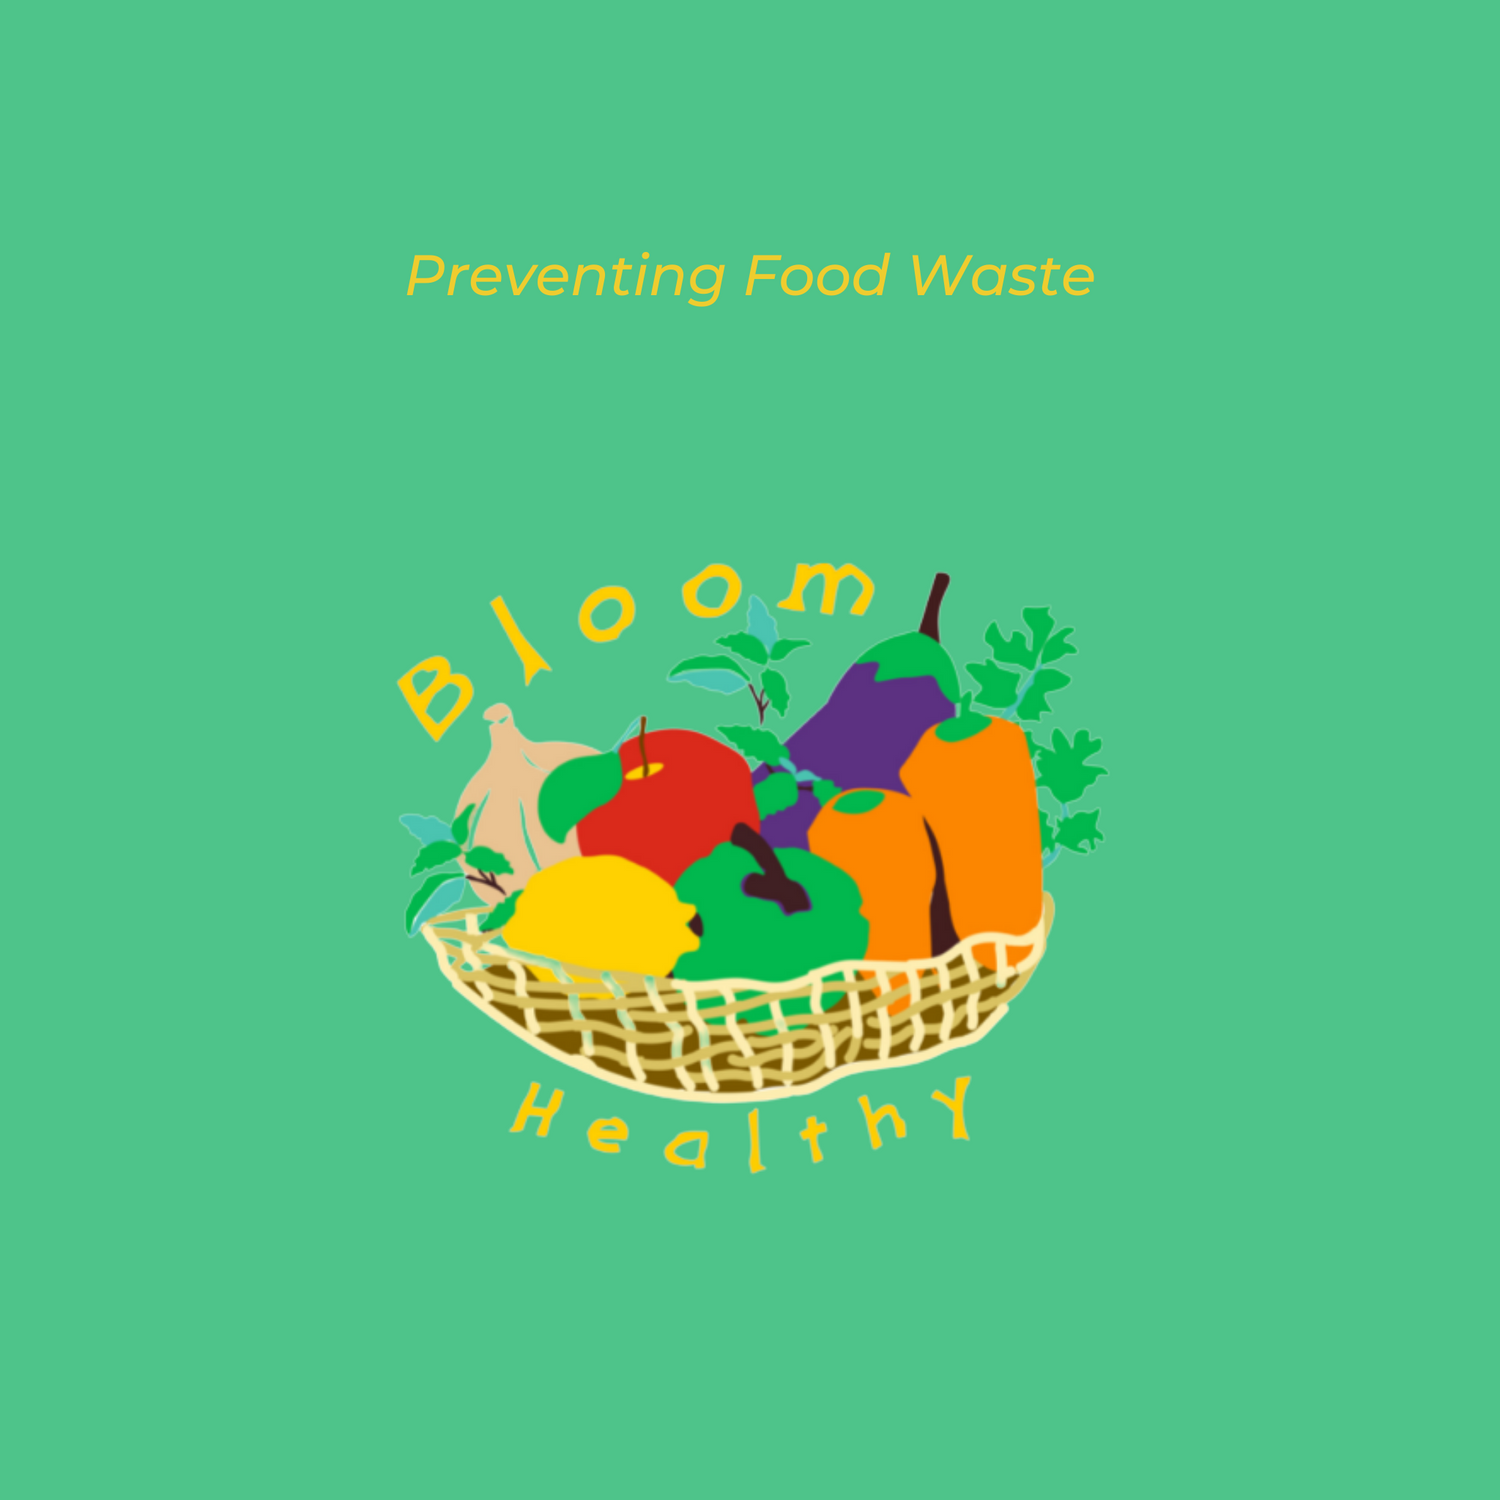 Preventing Food Waste through Produce Planning and Proper Storage